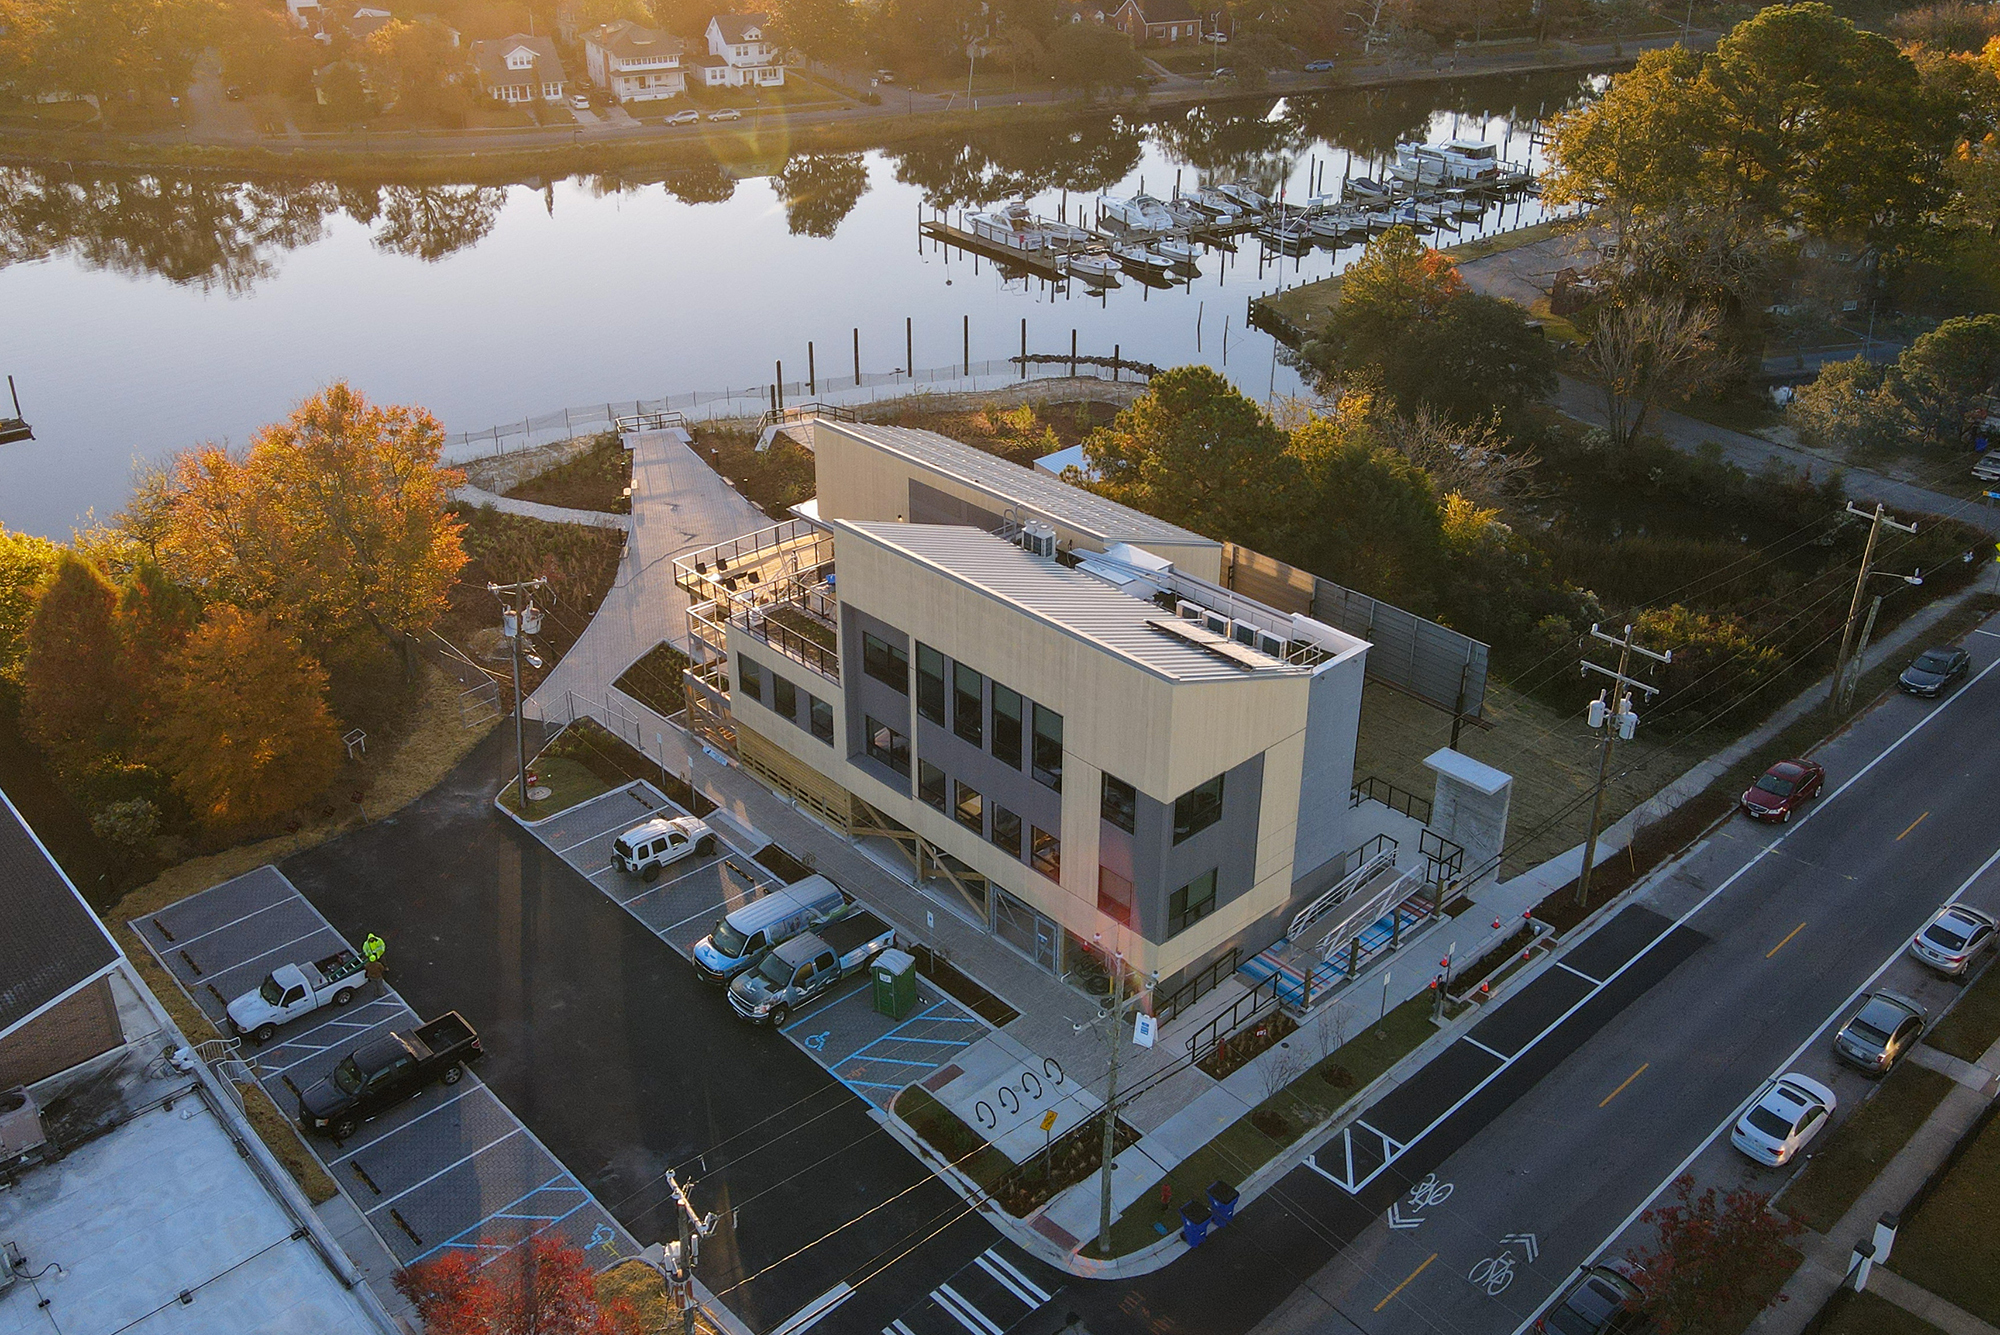 ELIZABETH RIVER PROJECT'S RYAN RESILIENCE LAB